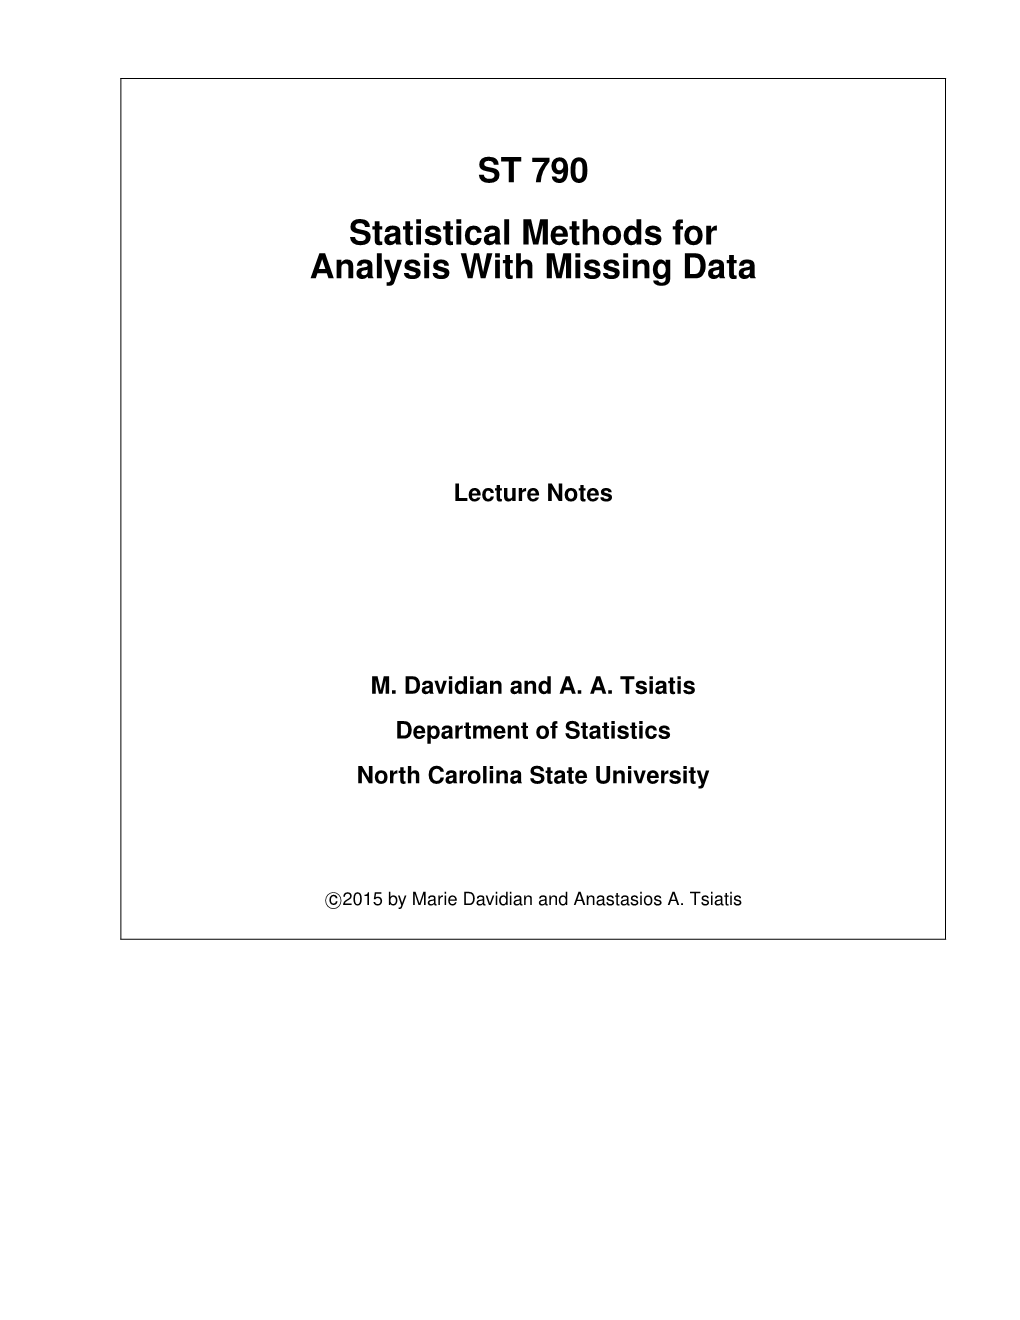 ST 790 Statistical Methods for Analysis with Missing Data